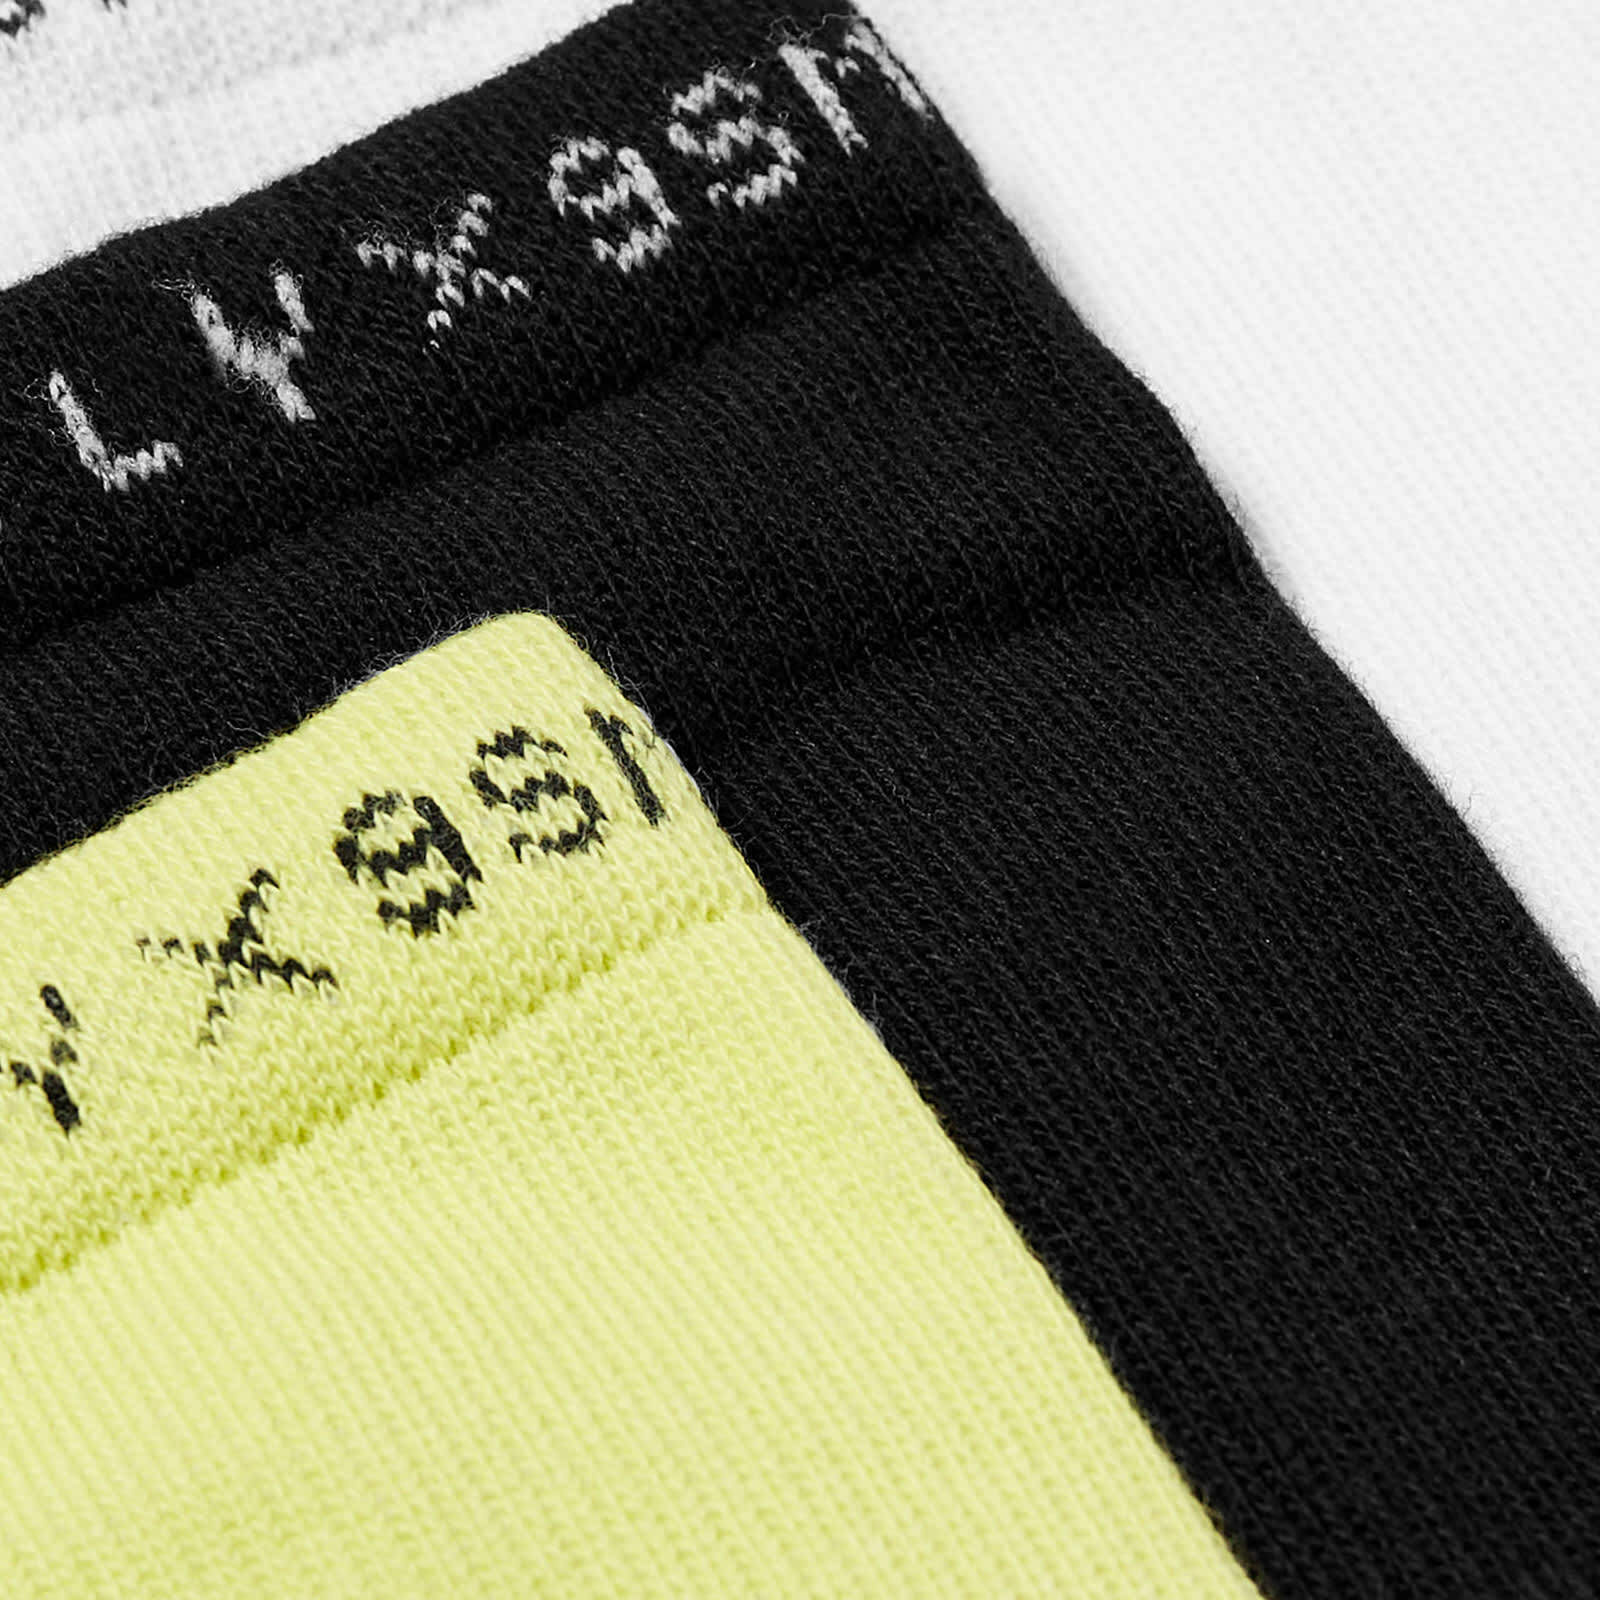 1017 ALYX 9SM Women's 3 Pack Socks in Black/White/Neon Washed Yellow ...